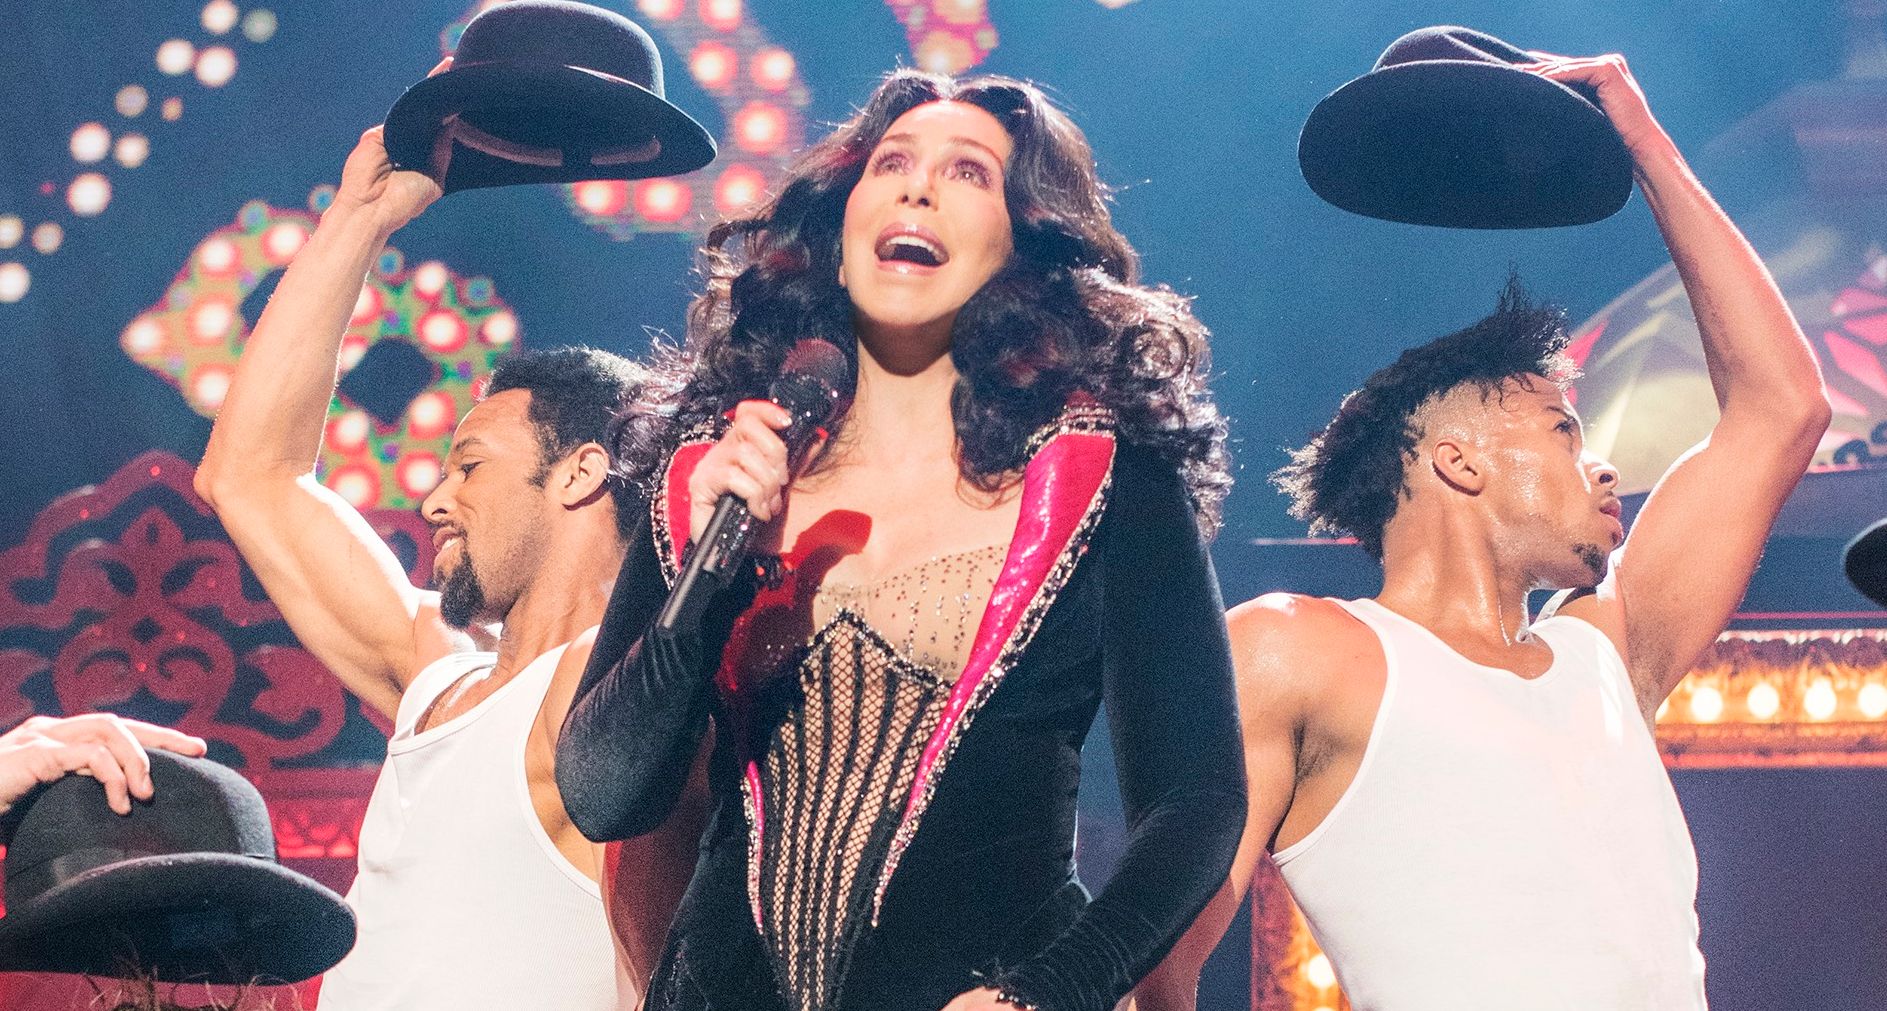 Cher is touring Australia for the first time in 13 years